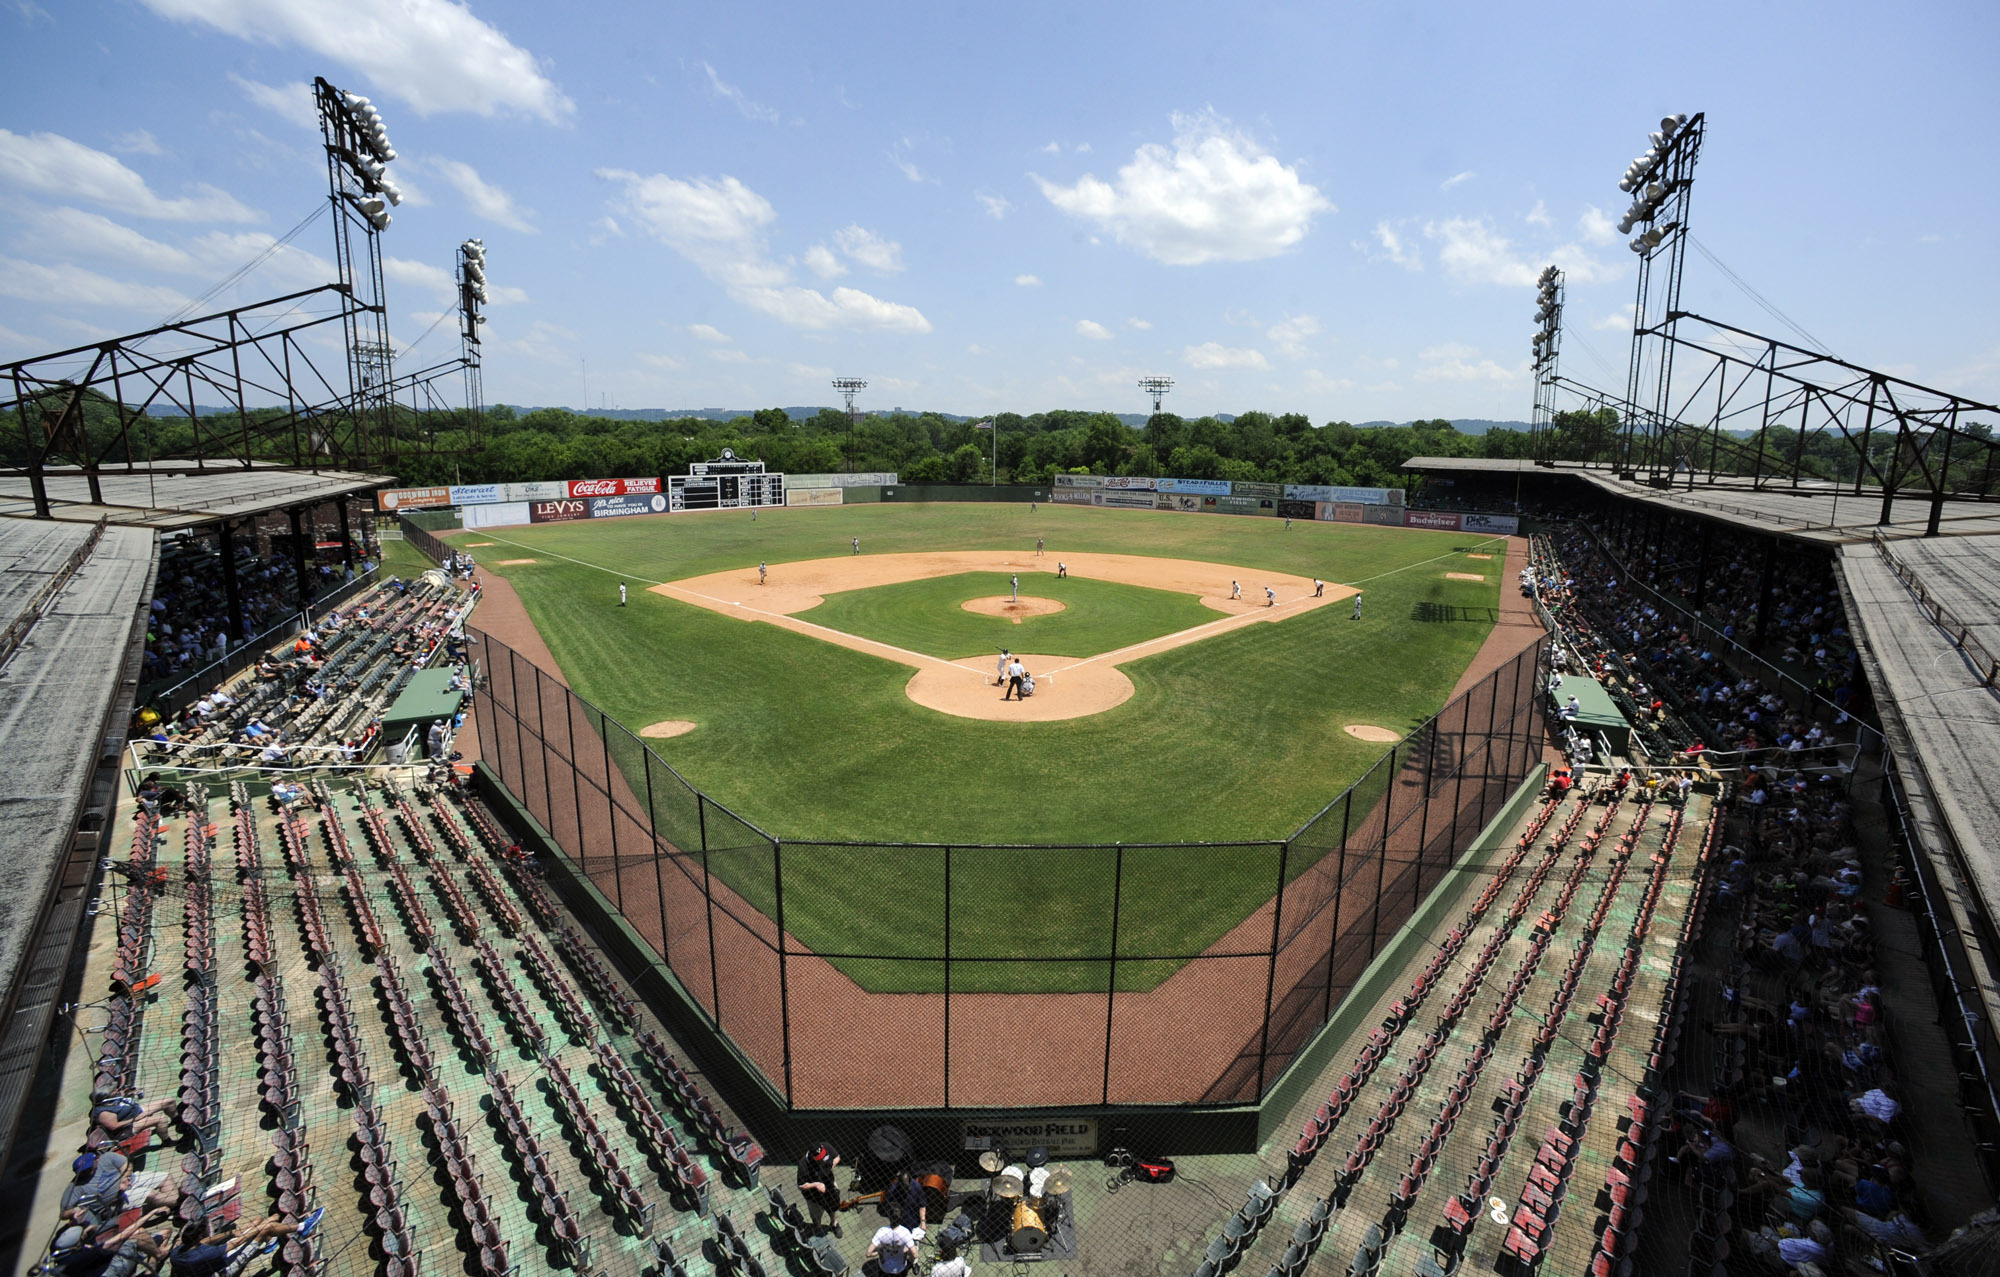 $4.5 million approved for Rickwood Field improvements